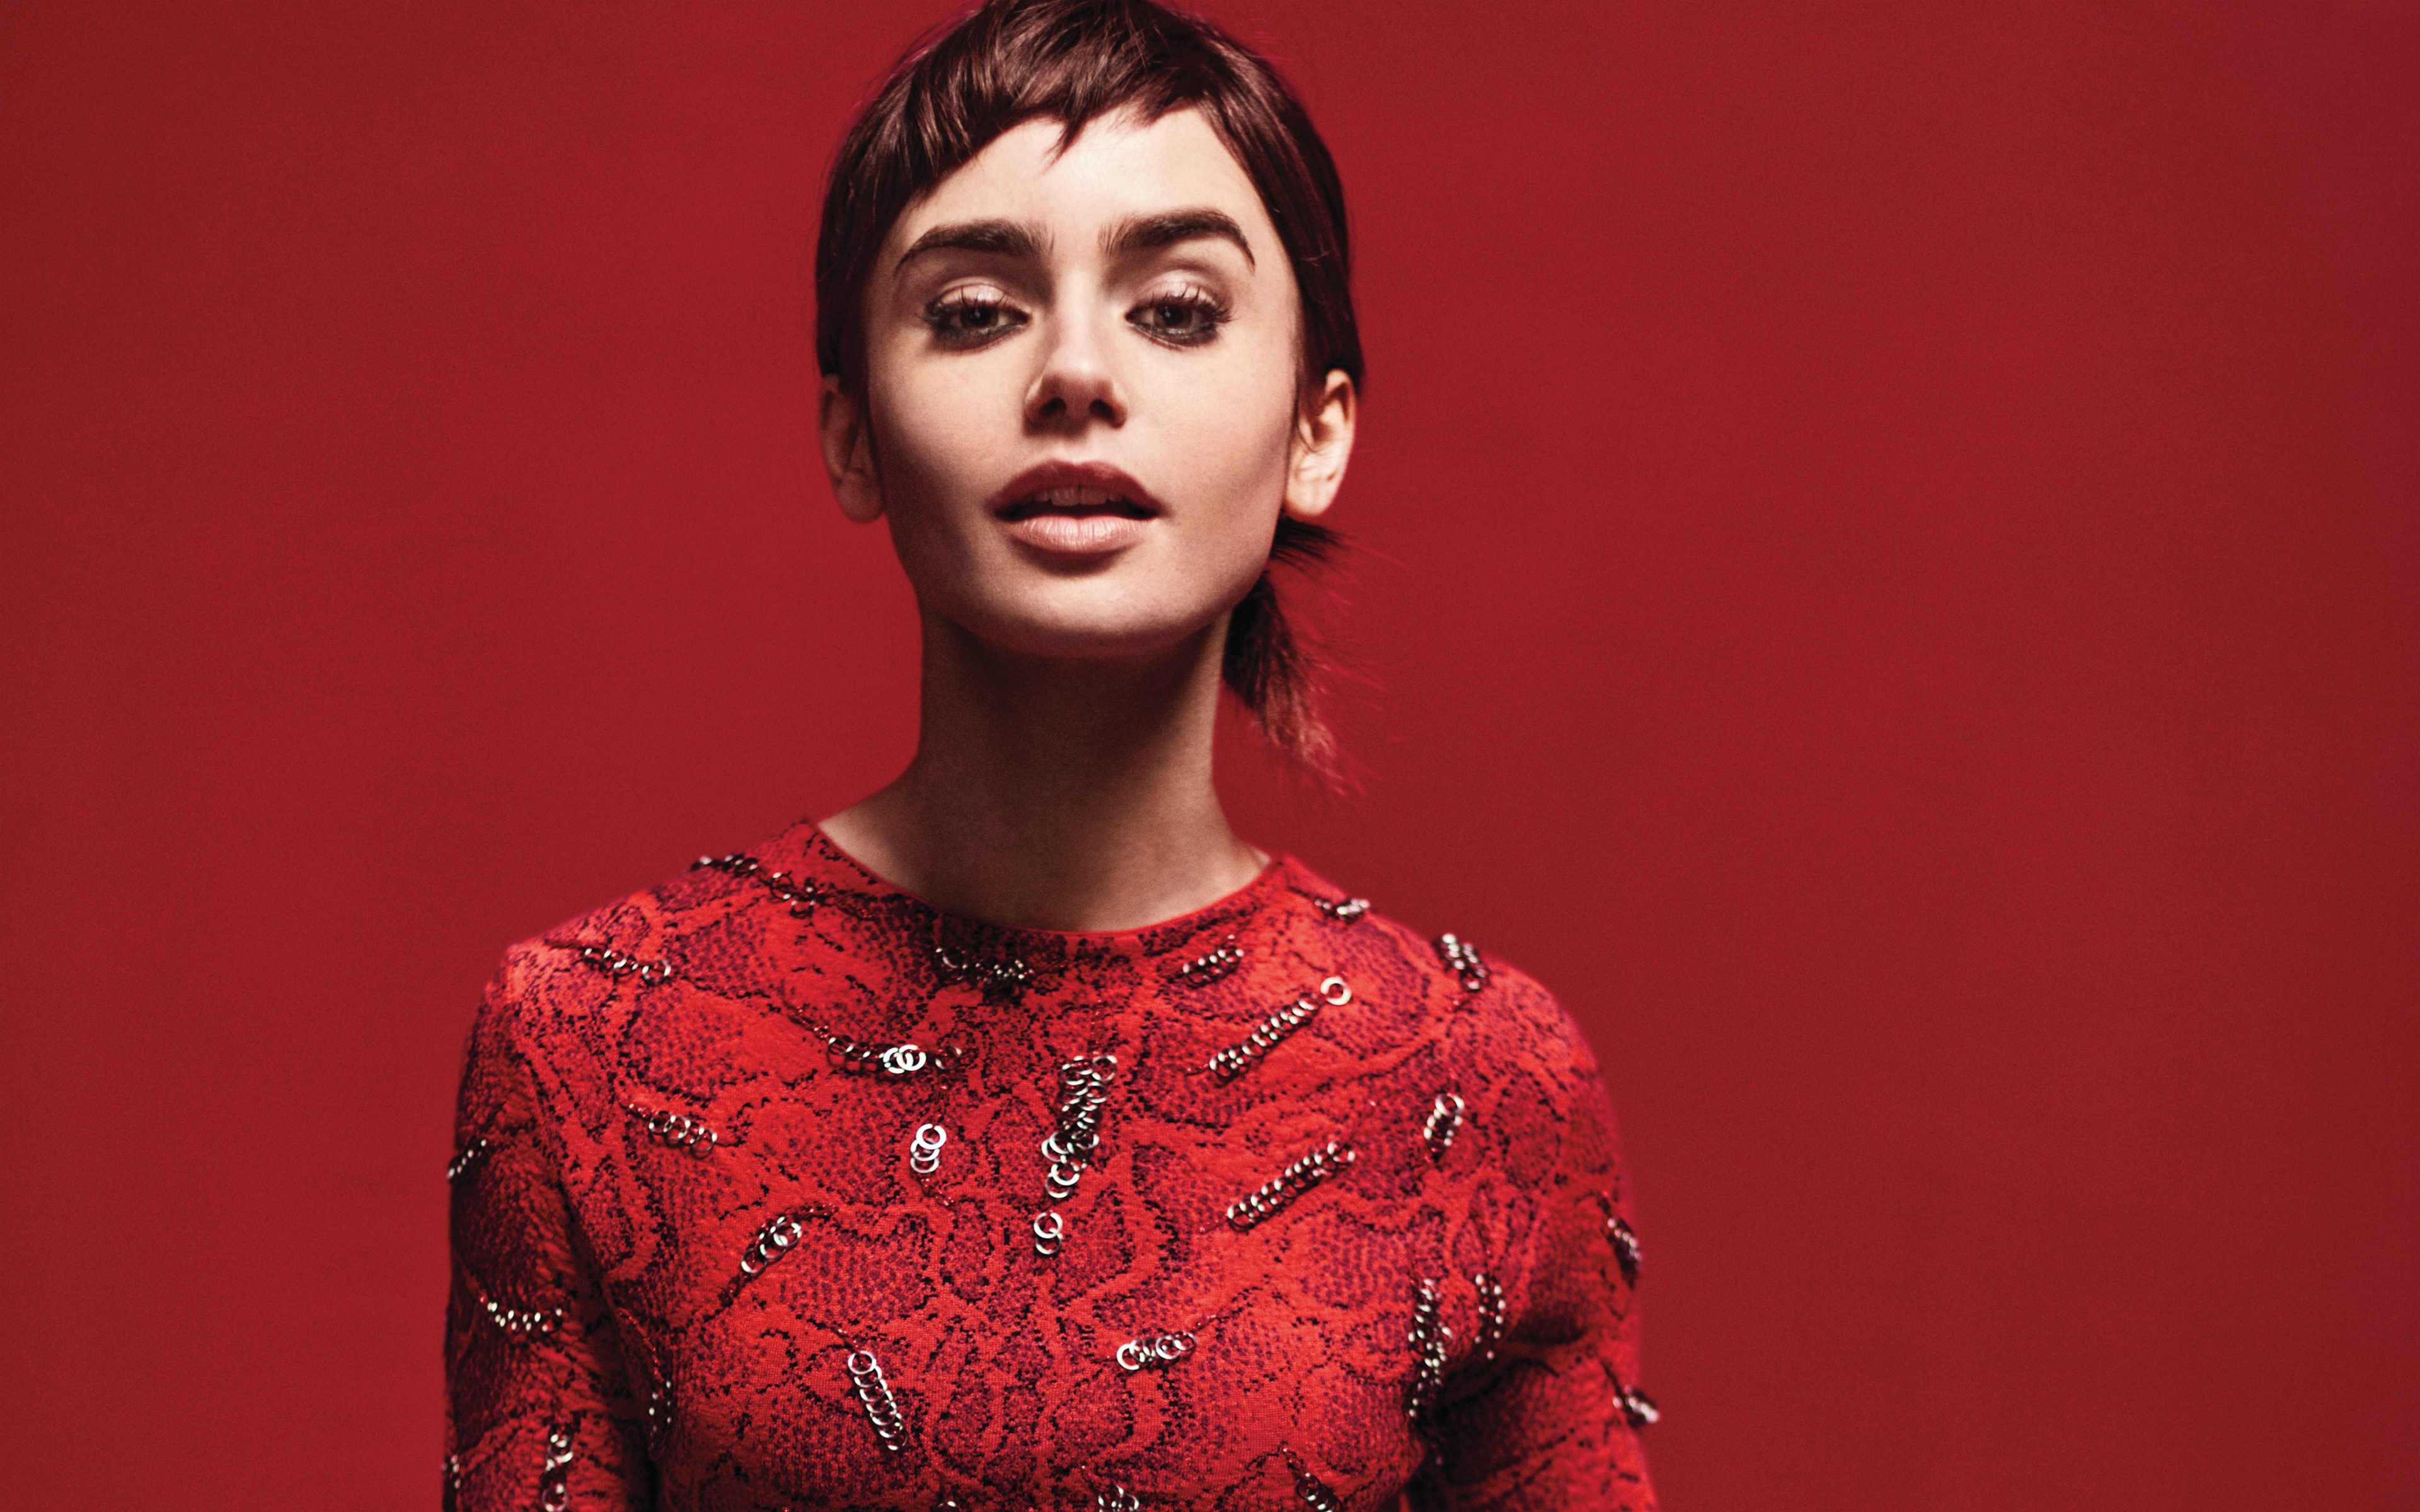 Lily Collins 2018 4K Wallpapers